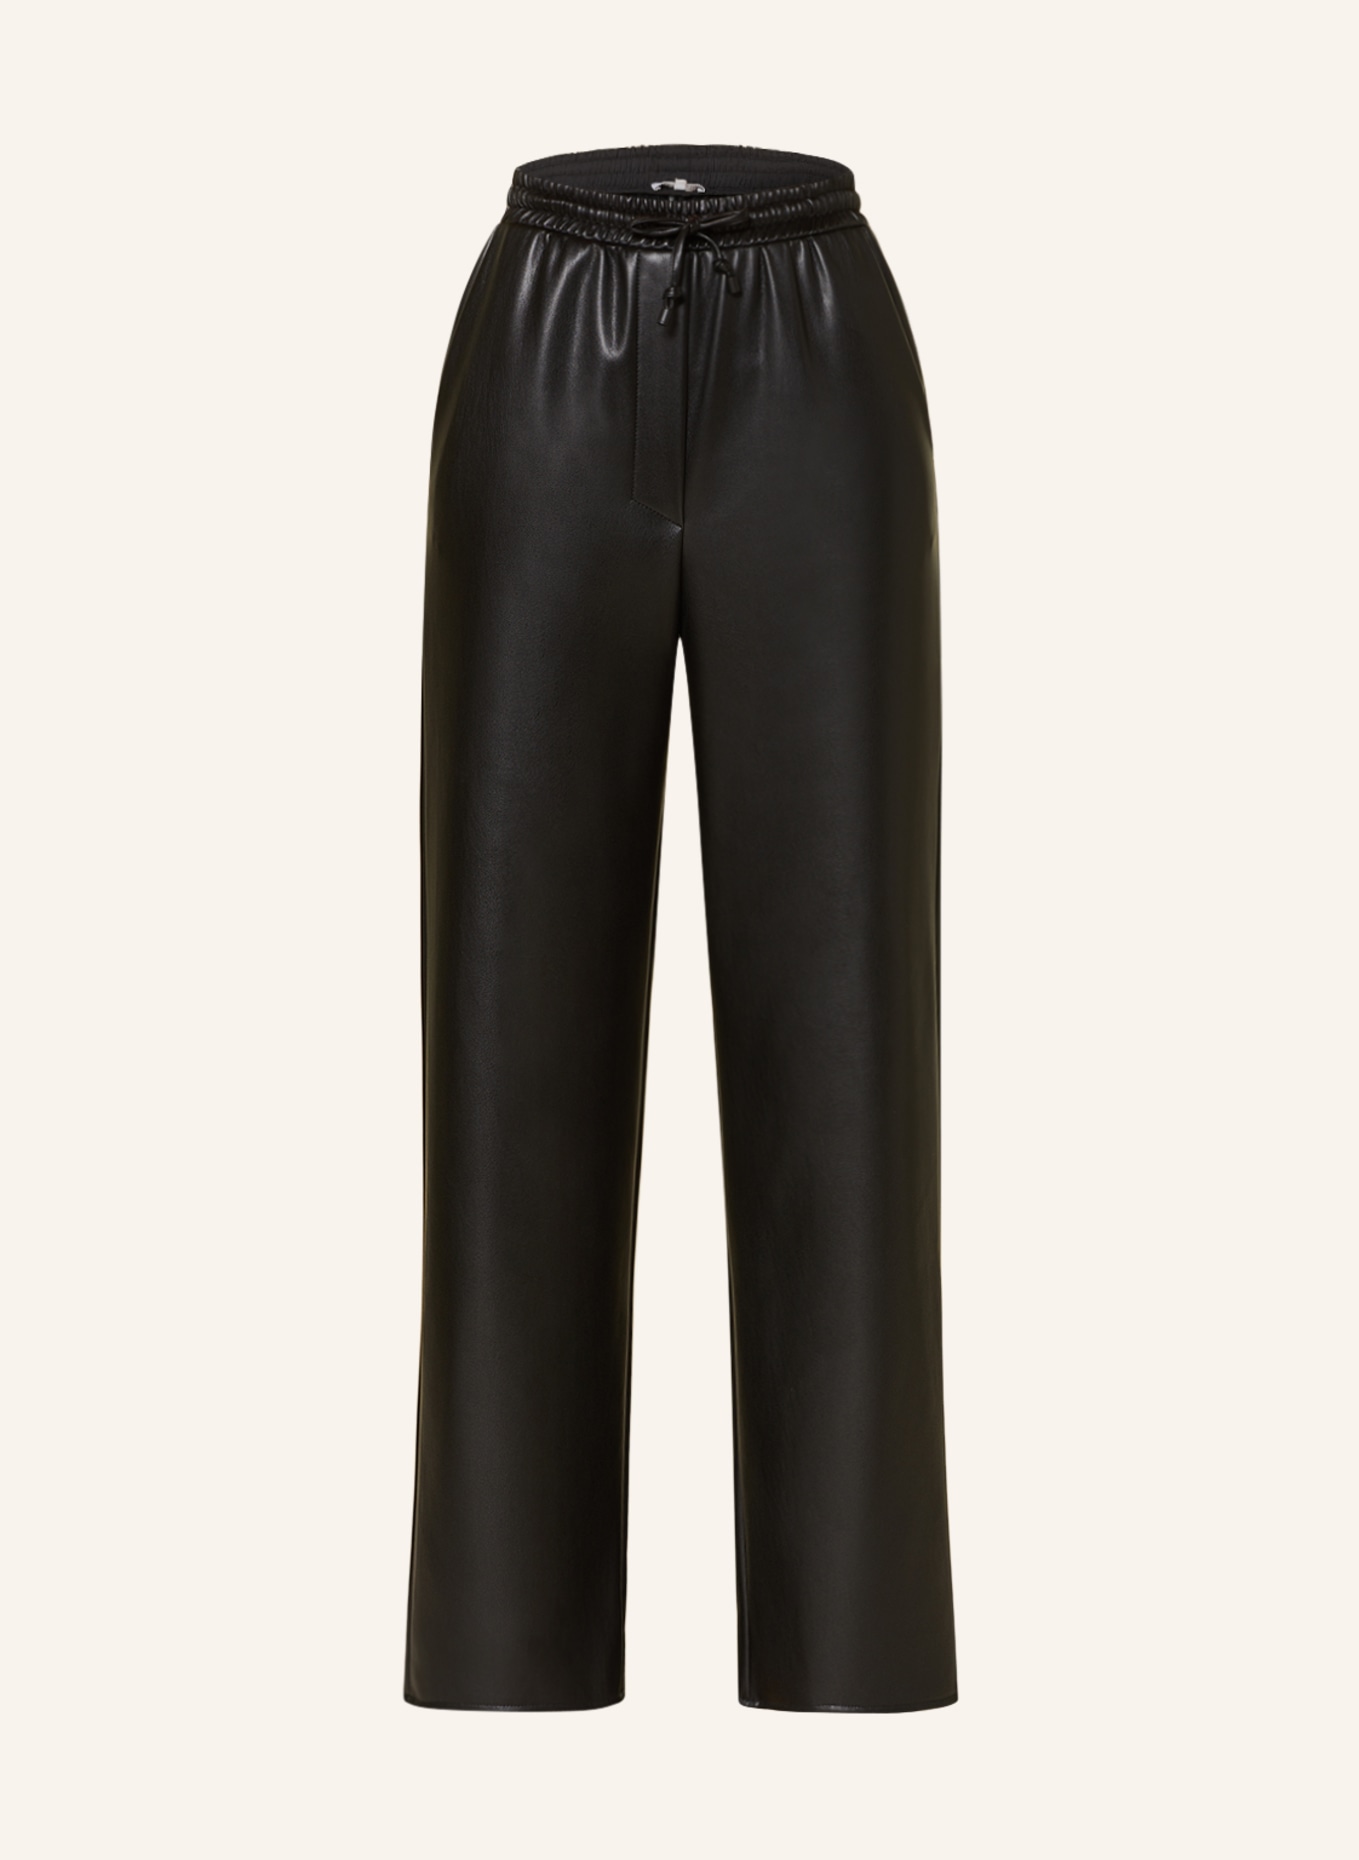 PATRIZIA PEPE Pants in jogger style in leather look, Color: BLACK (Image 1)